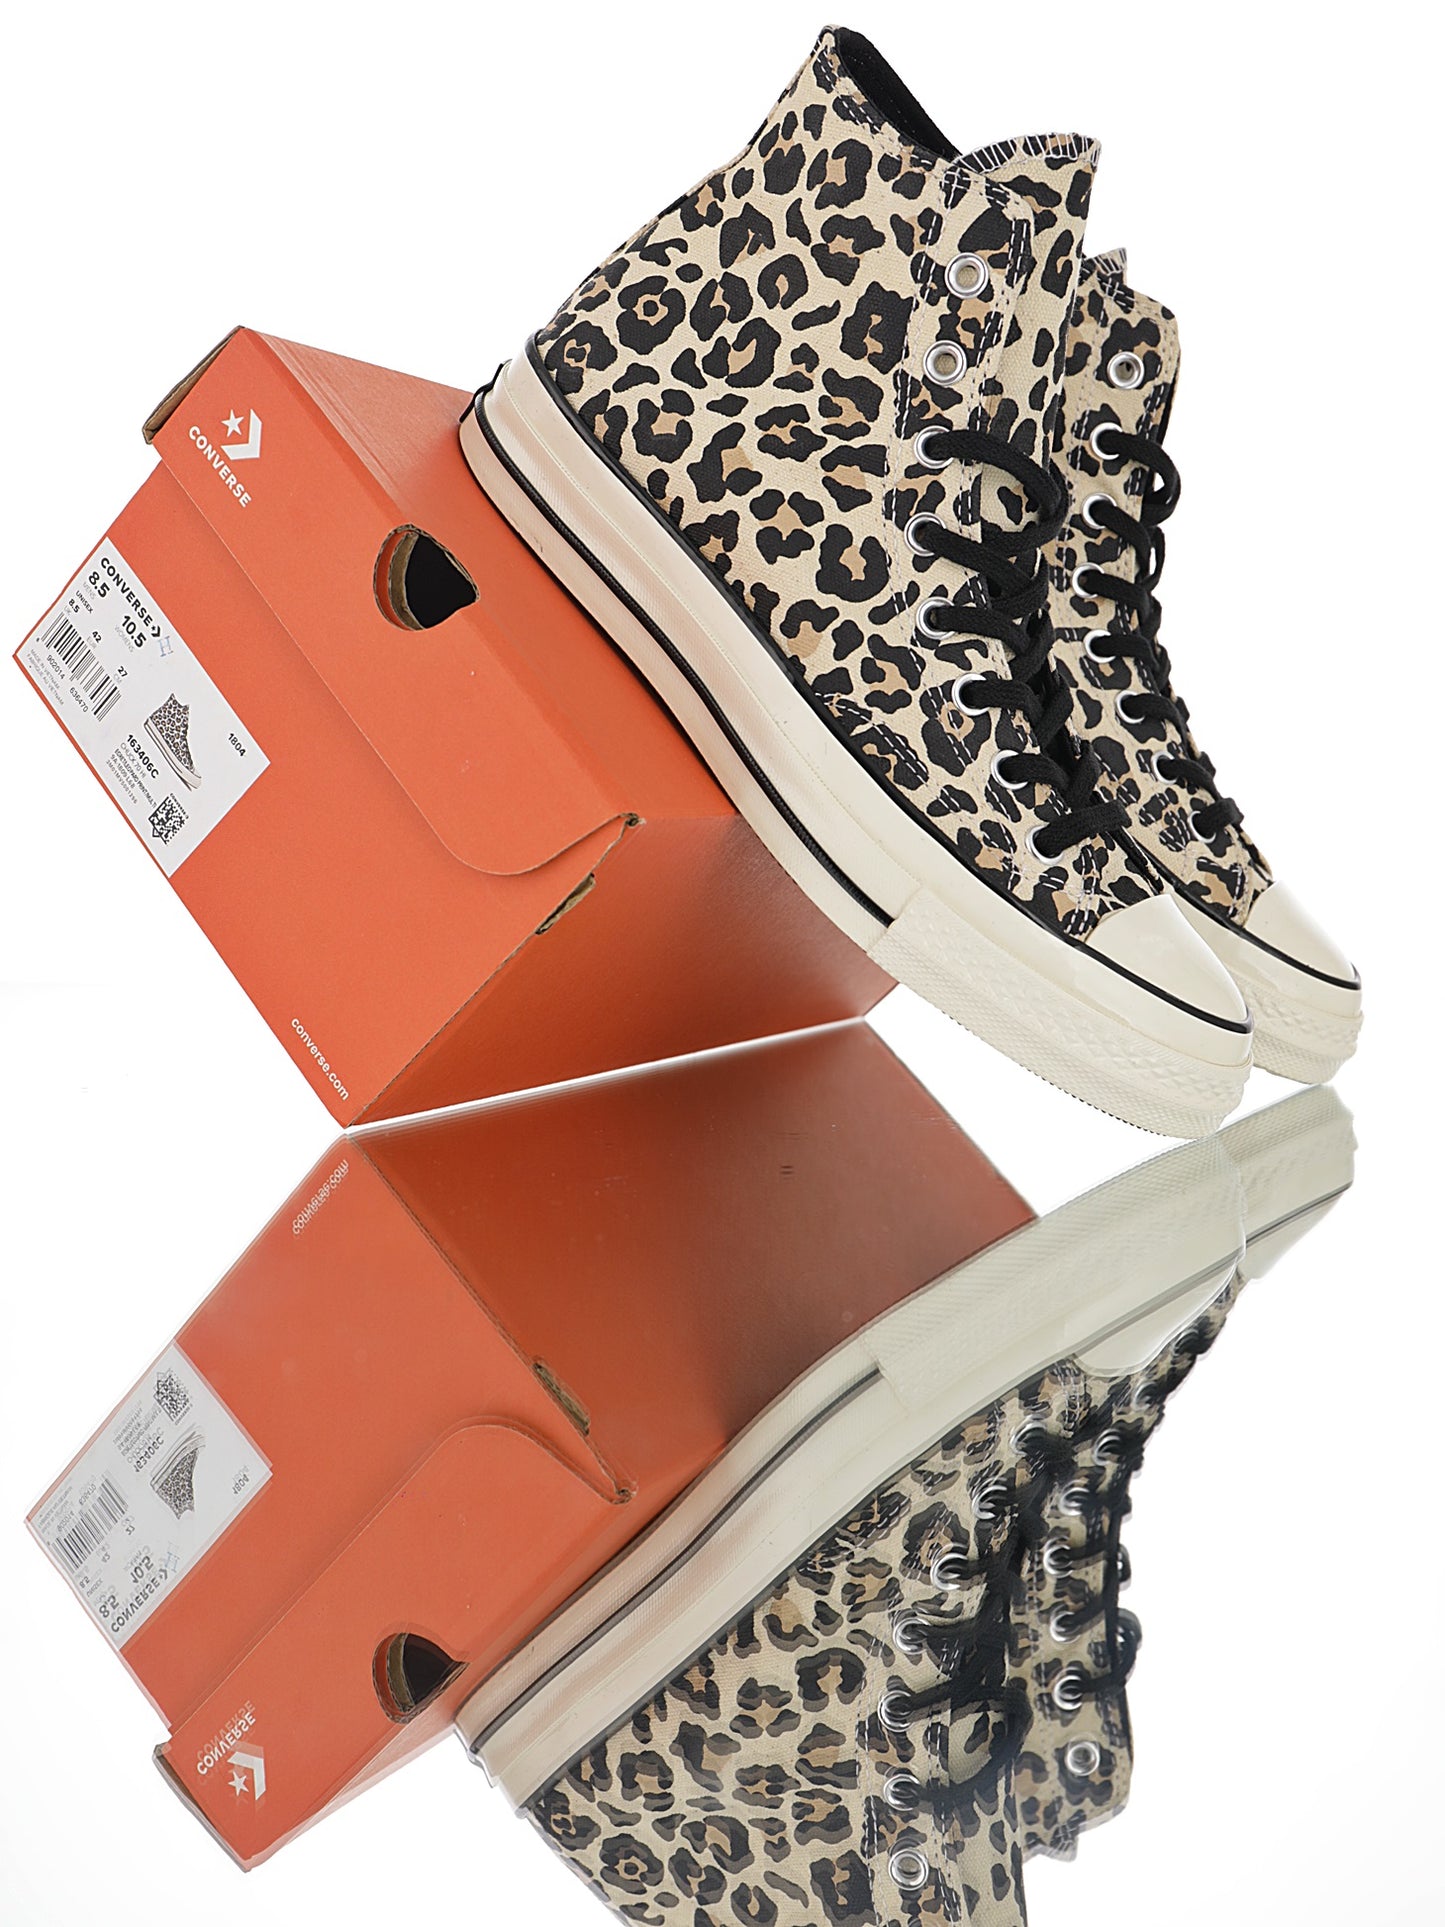 Taylor All Star 1970 HI 'Leopard Print' - whatever on 